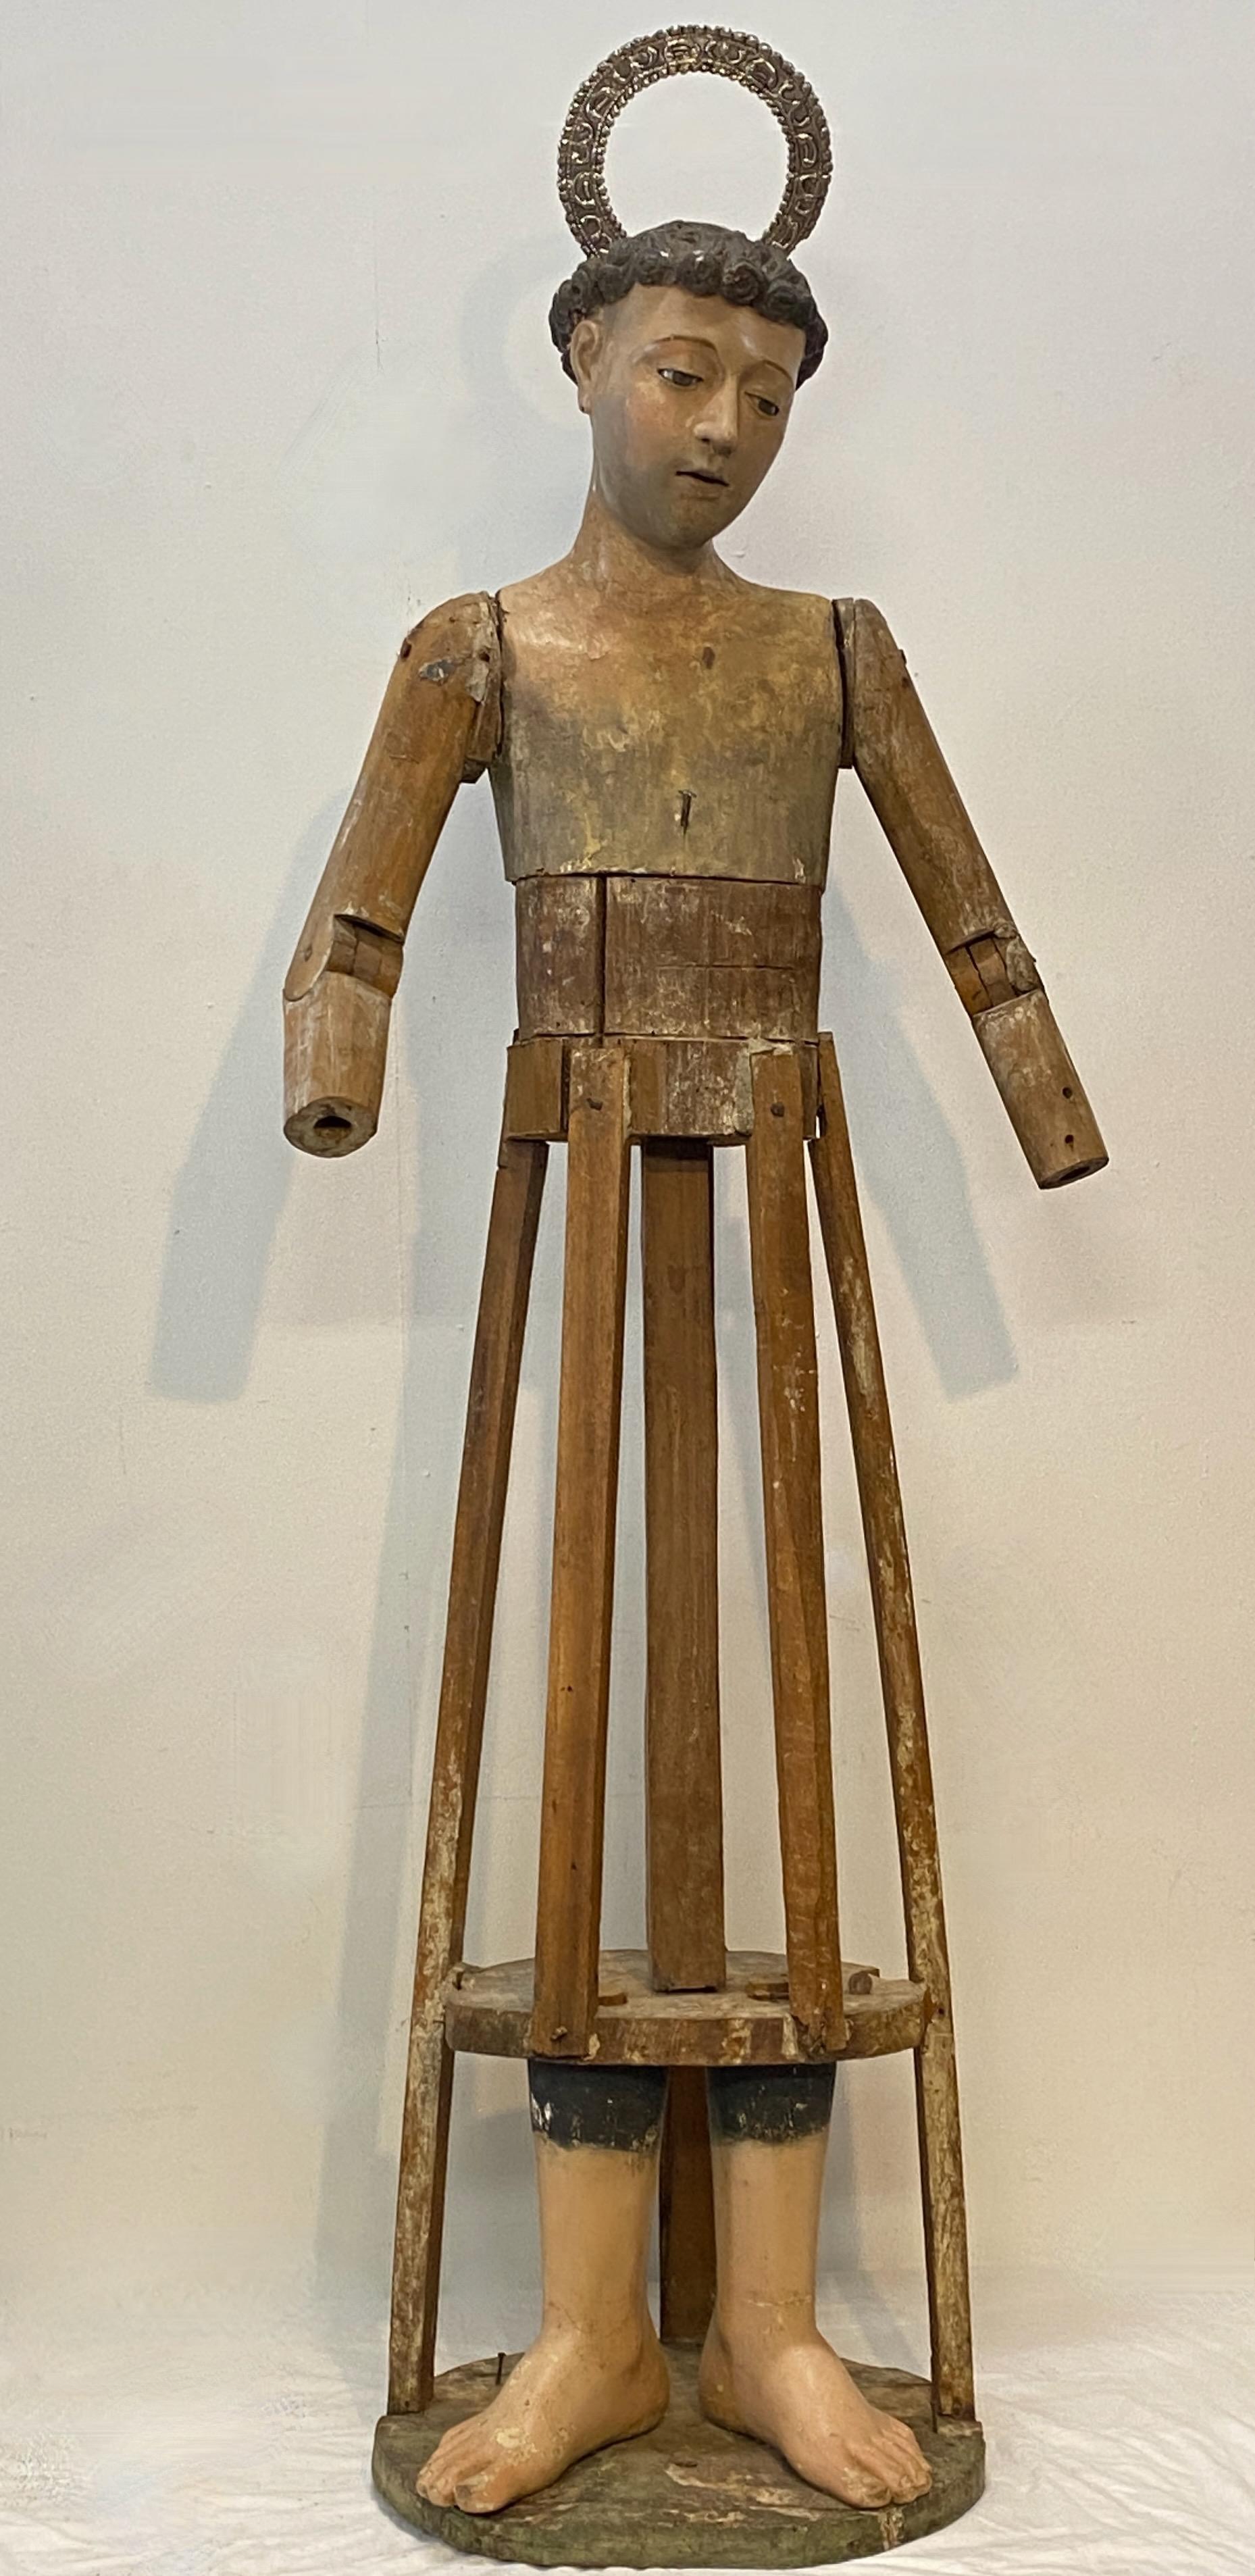 A life-size Spanish religious Santo of St Francis in carved and polychromed wood. Hand painted features with glass eyes and silver halo or crown. He would have been appropriately clothed in its day. 
Expected signs of age with some losses, bust